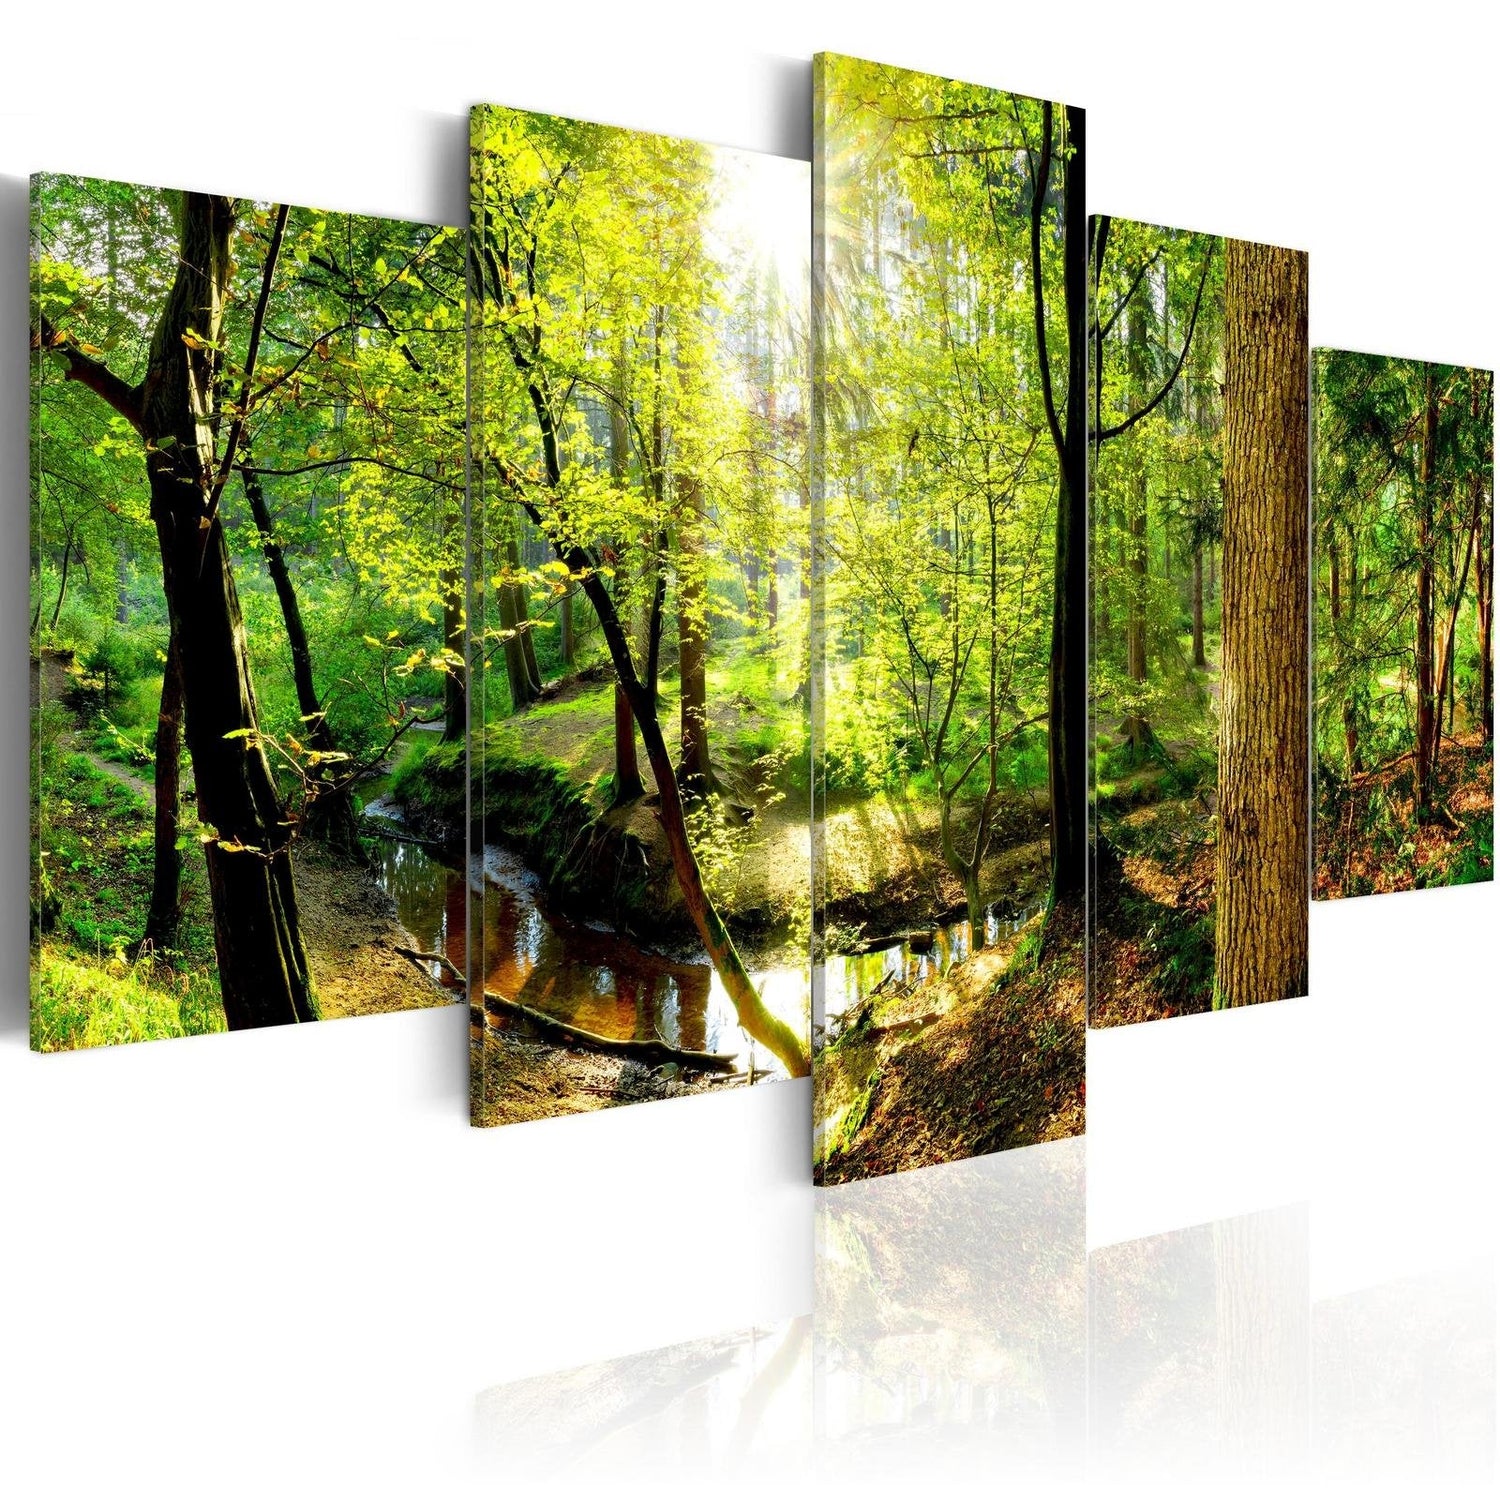 Stretched Canvas Landscape Art - Early Morning in the Forest-Tiptophomedecor